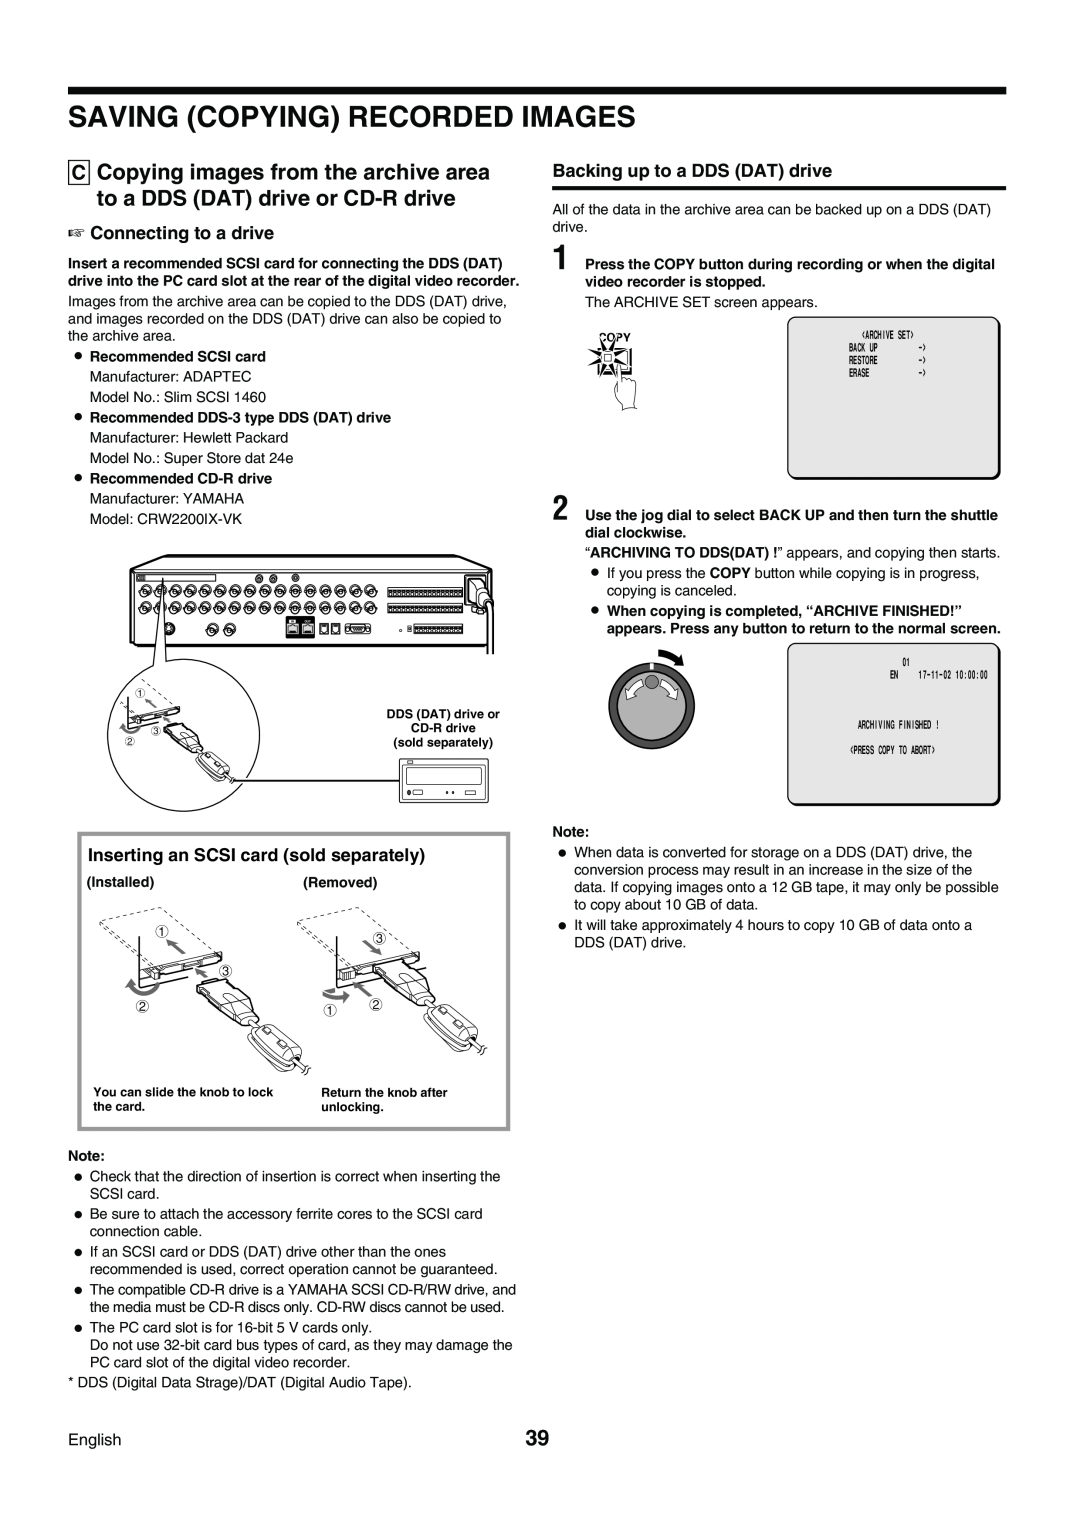 Sanyo DSR-3009P instruction manual Saving Copying Recorded Images, Connecting to a drive, Backing up to a DDS DAT drive 